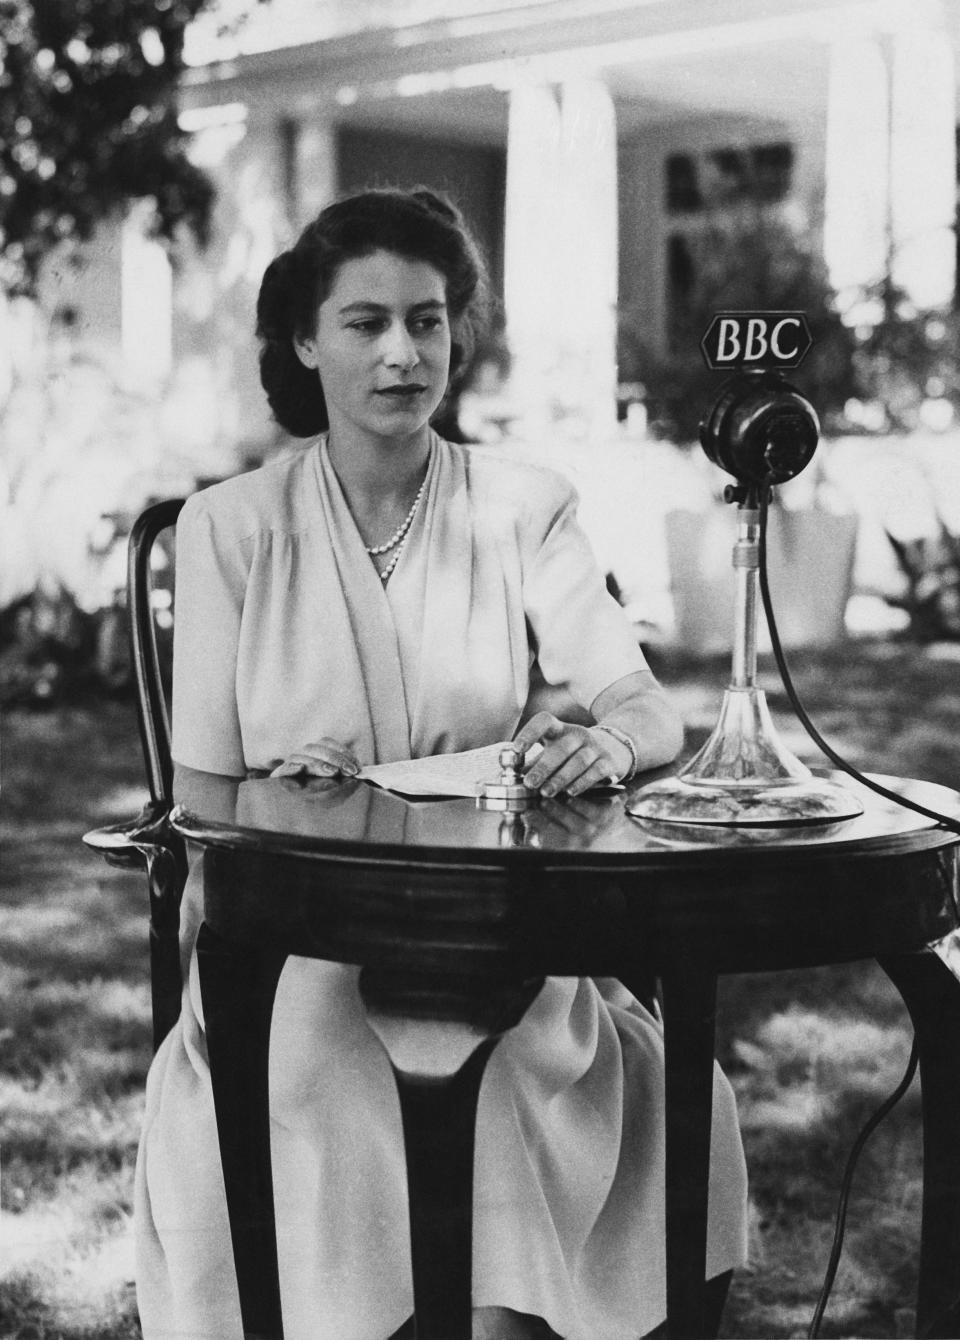 The then Princess Elizabeth makes a broadcast from the gardens of Government House in Cape Town, South Africa, on her 21st birthday, 21 April 1947.